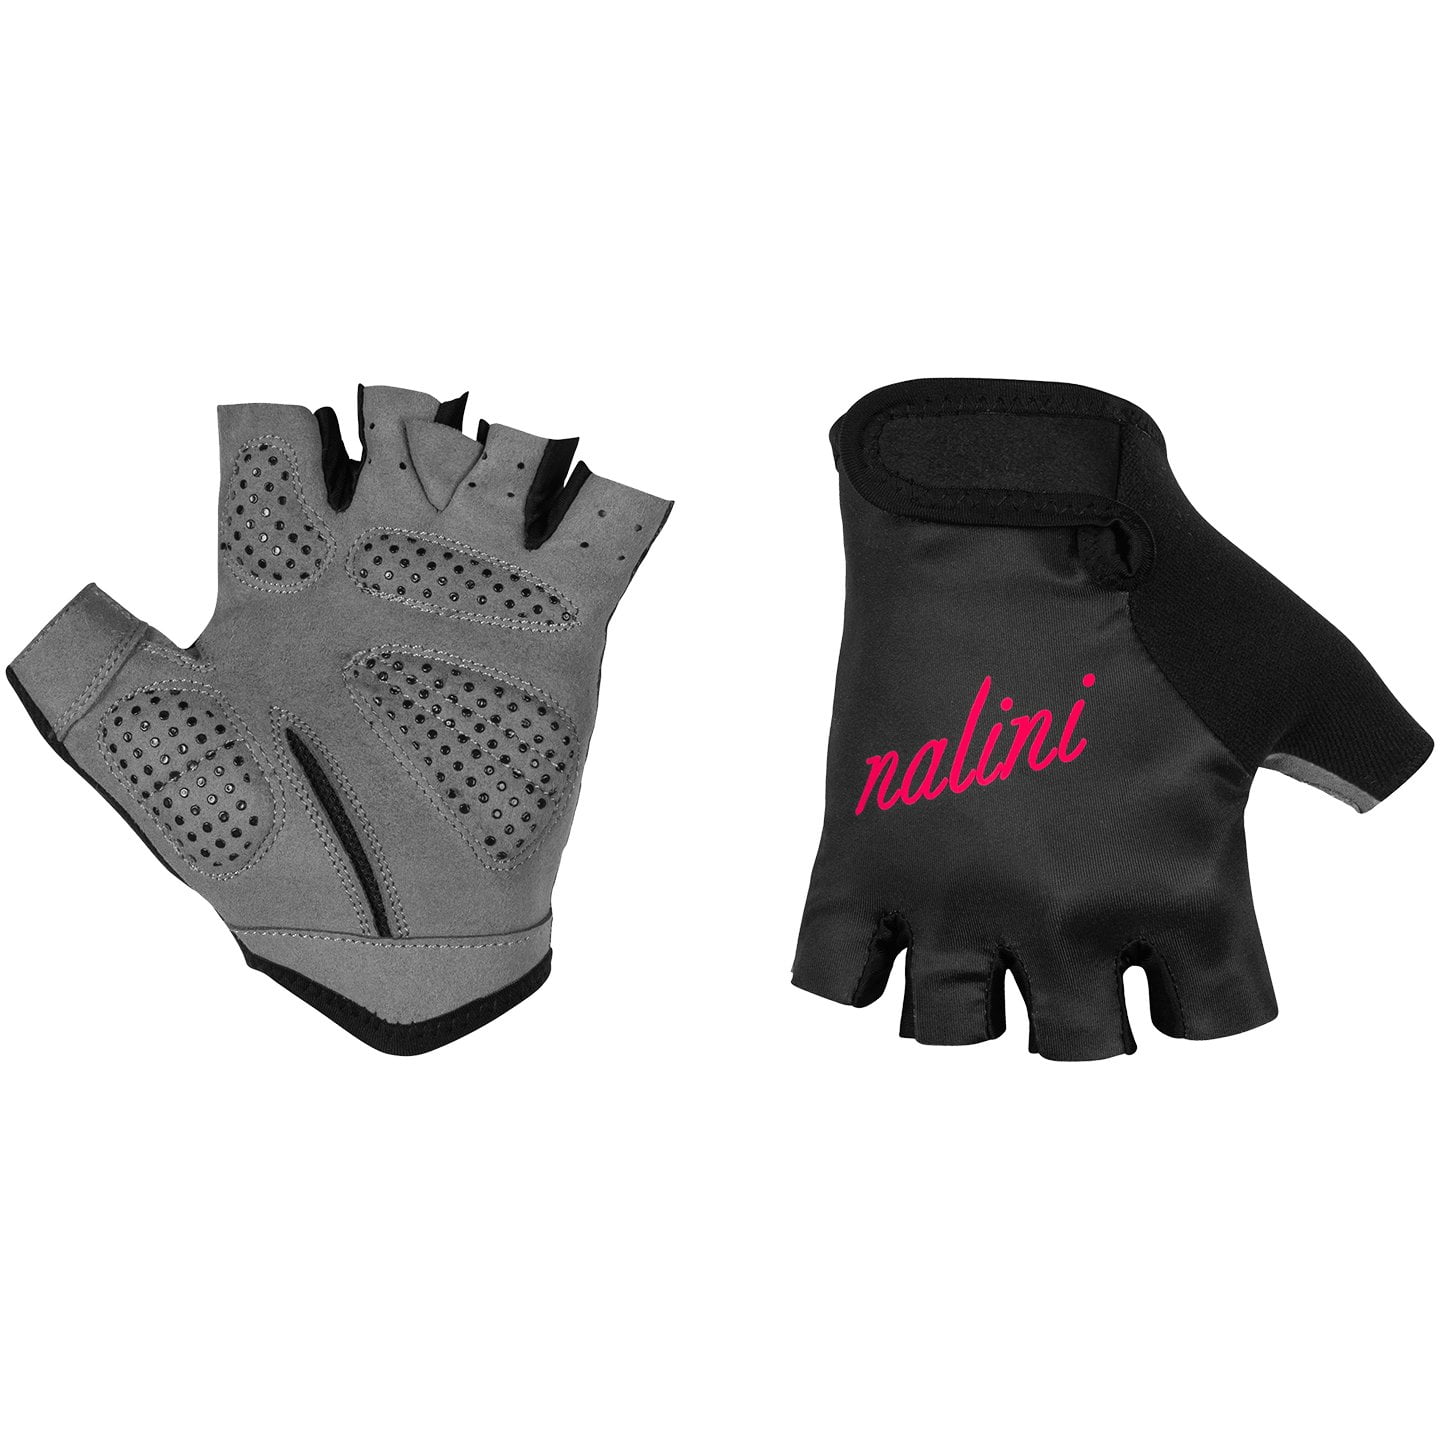 NALINI New Roxana Women’s Gloves Women’s Cycling Gloves, size XL, Cycle gloves, Cycle clothes